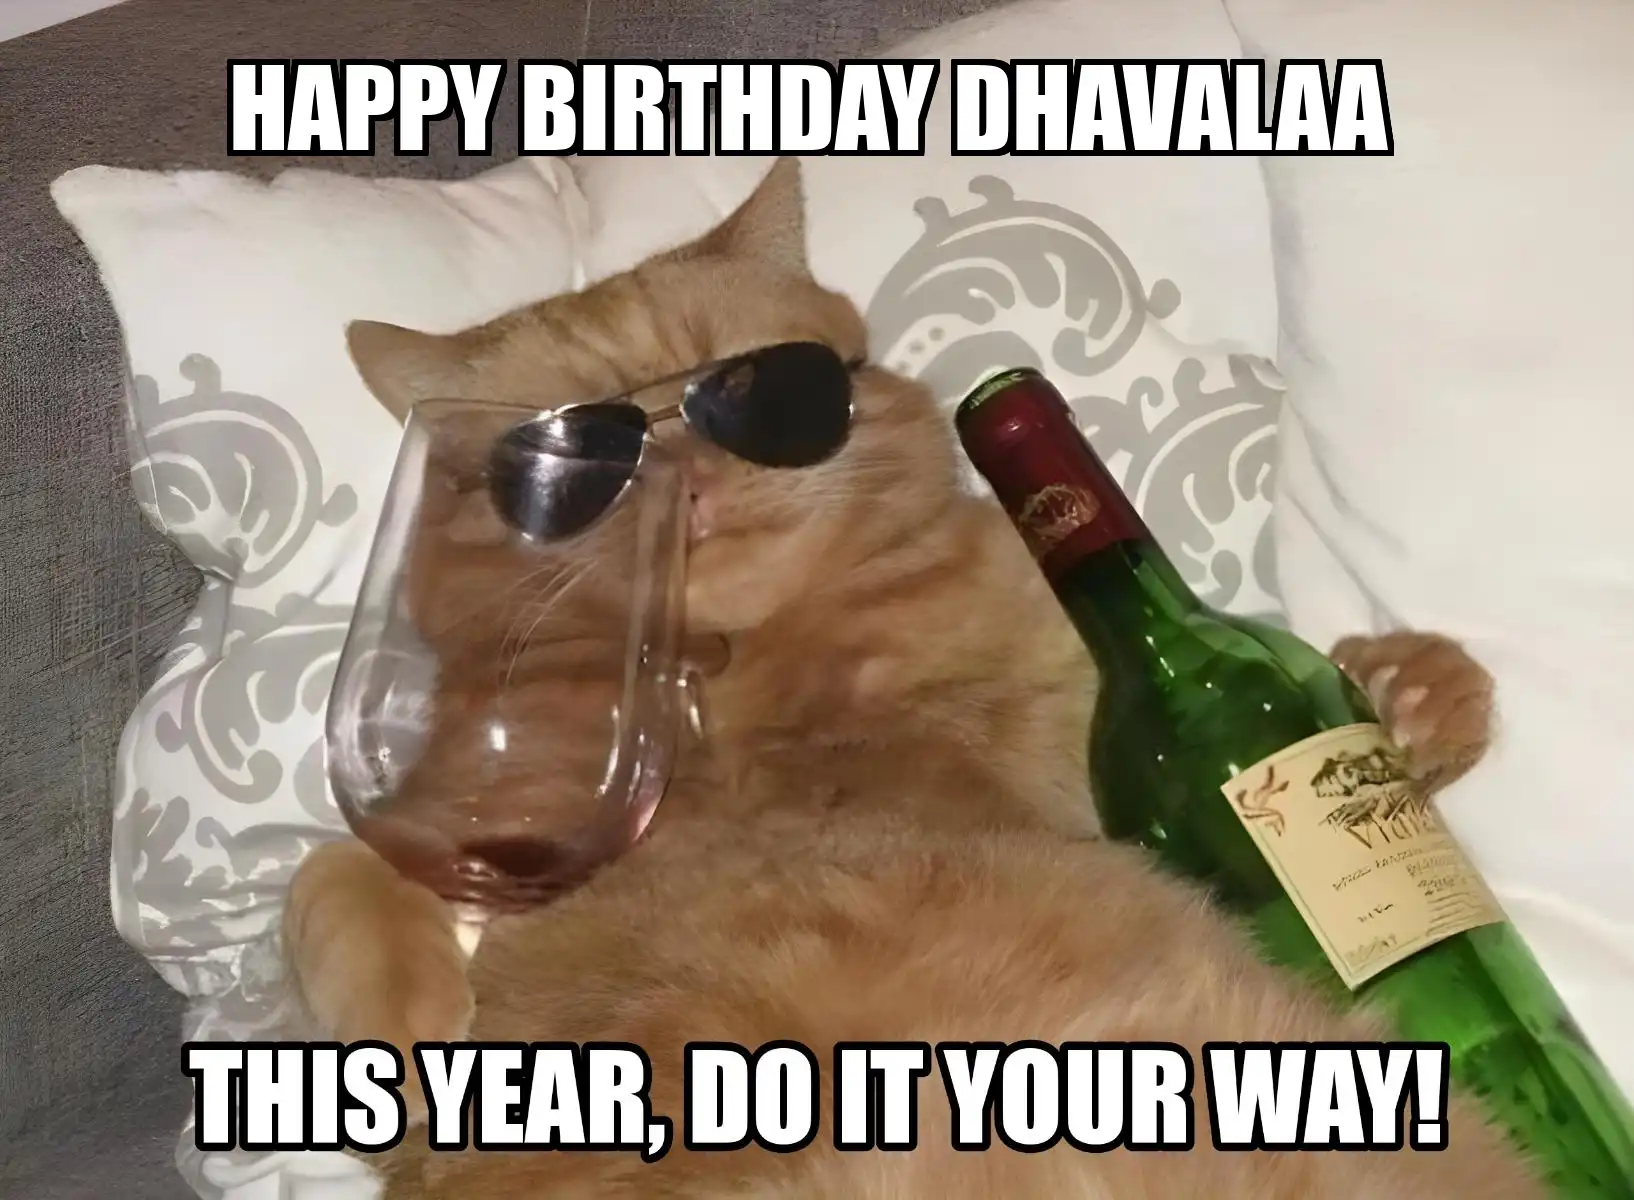 Happy Birthday Dhavalaa This Year Do It Your Way Meme